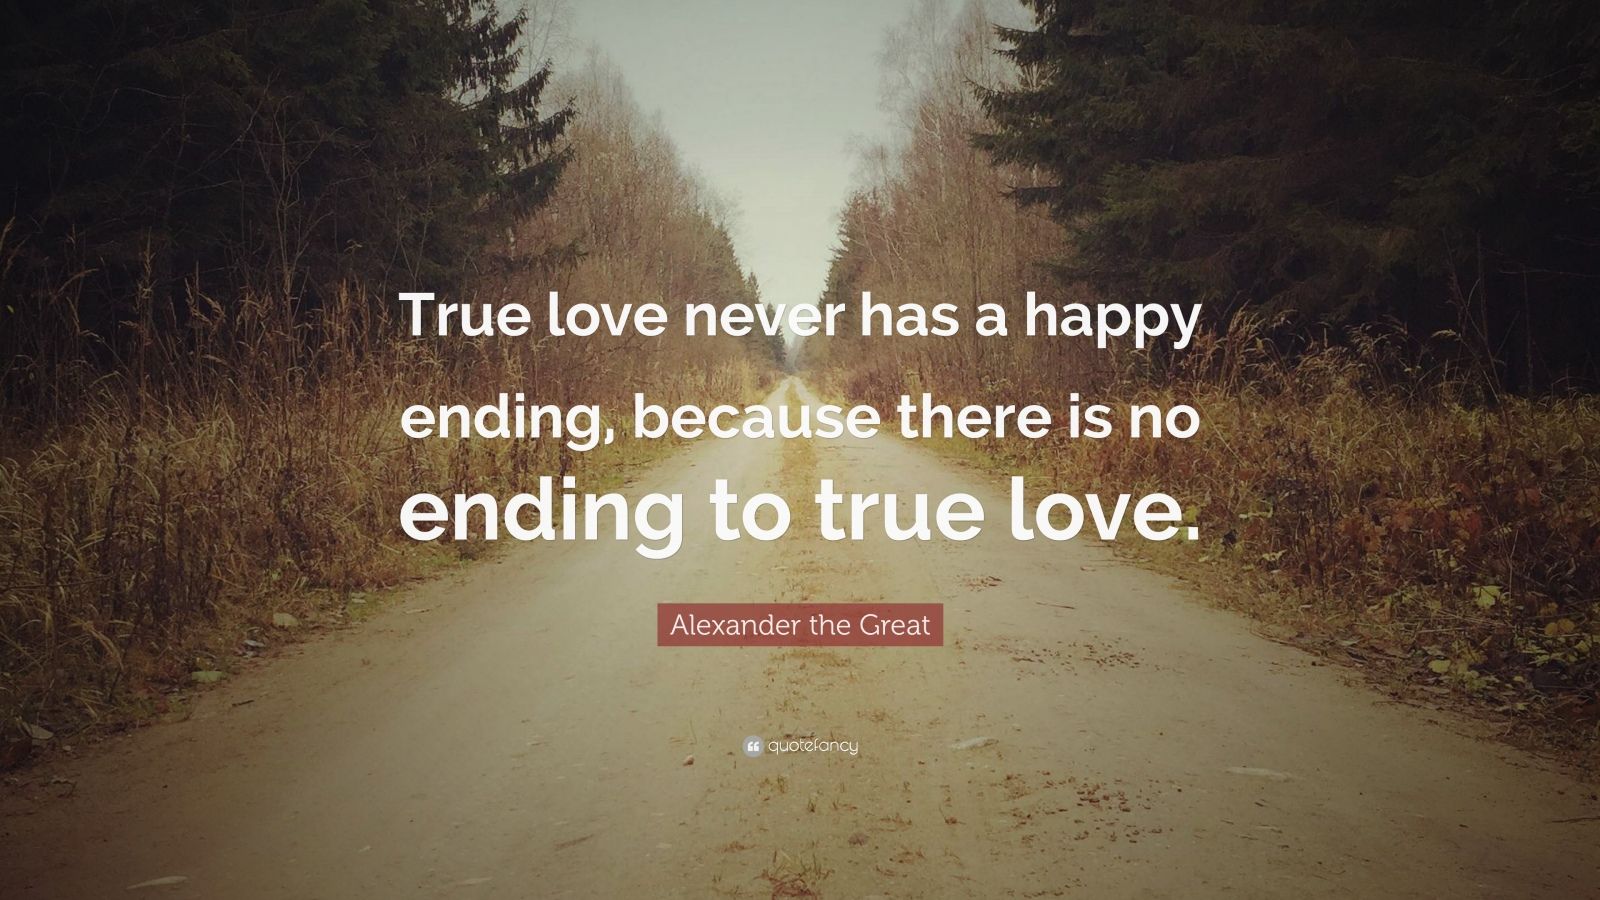 Alexander the Great Quote: “True love never has a happy ending, because